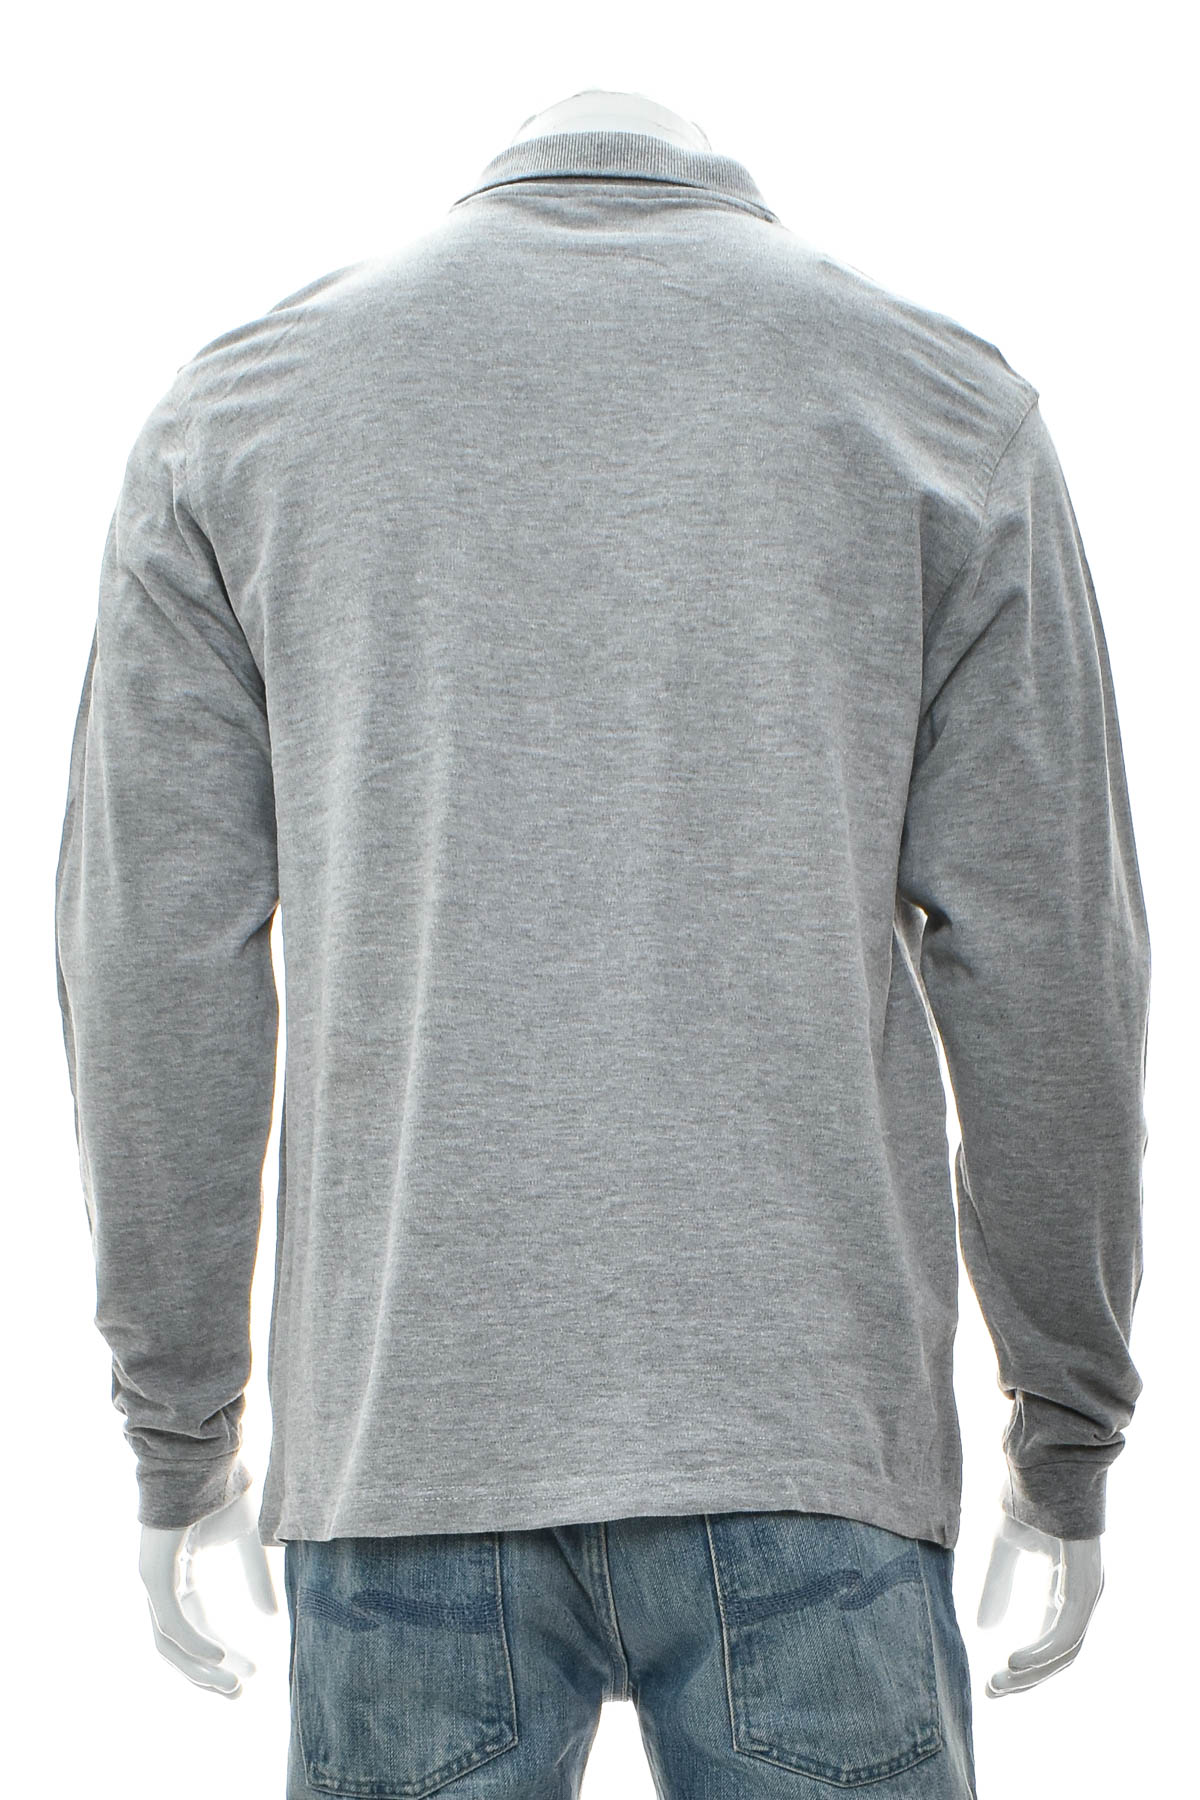 Men's sweater - B&C Collection - 1